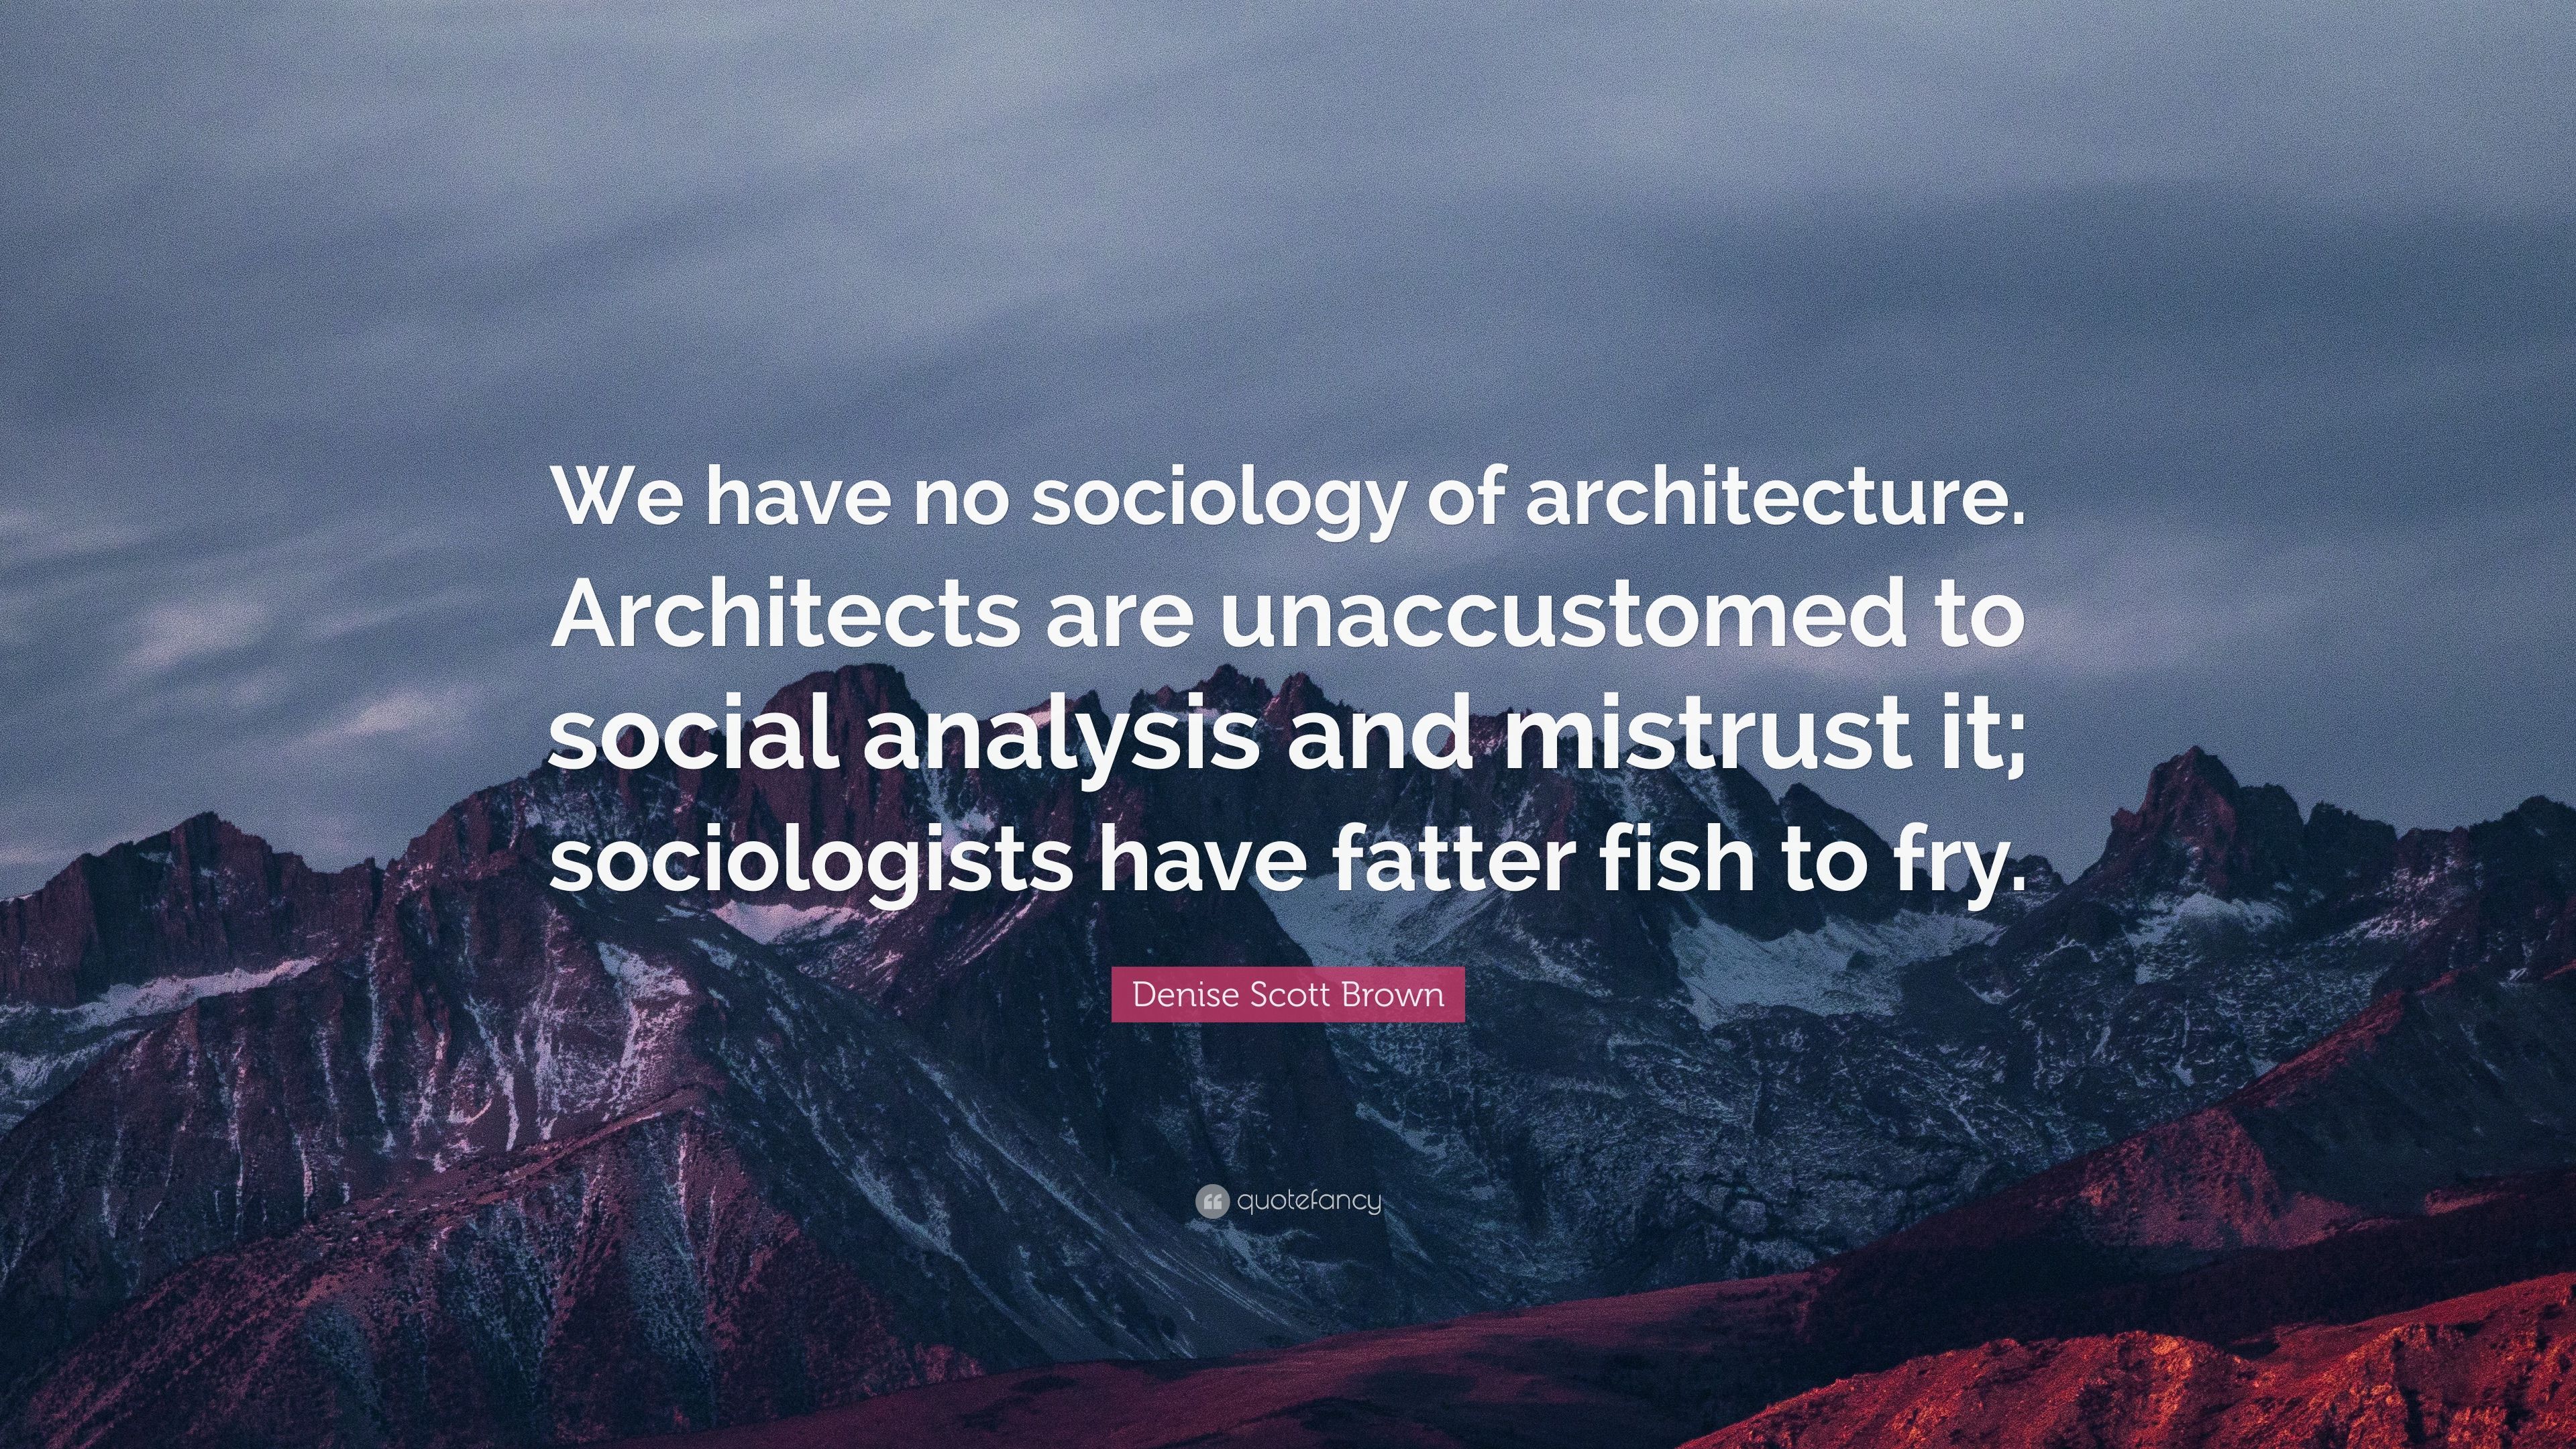 Denise Scott Brown Quote: “We have no sociology of architecture. Architects are unaccustomed to social analysis and mistrust it; sociologists have .” (9 wallpaper)